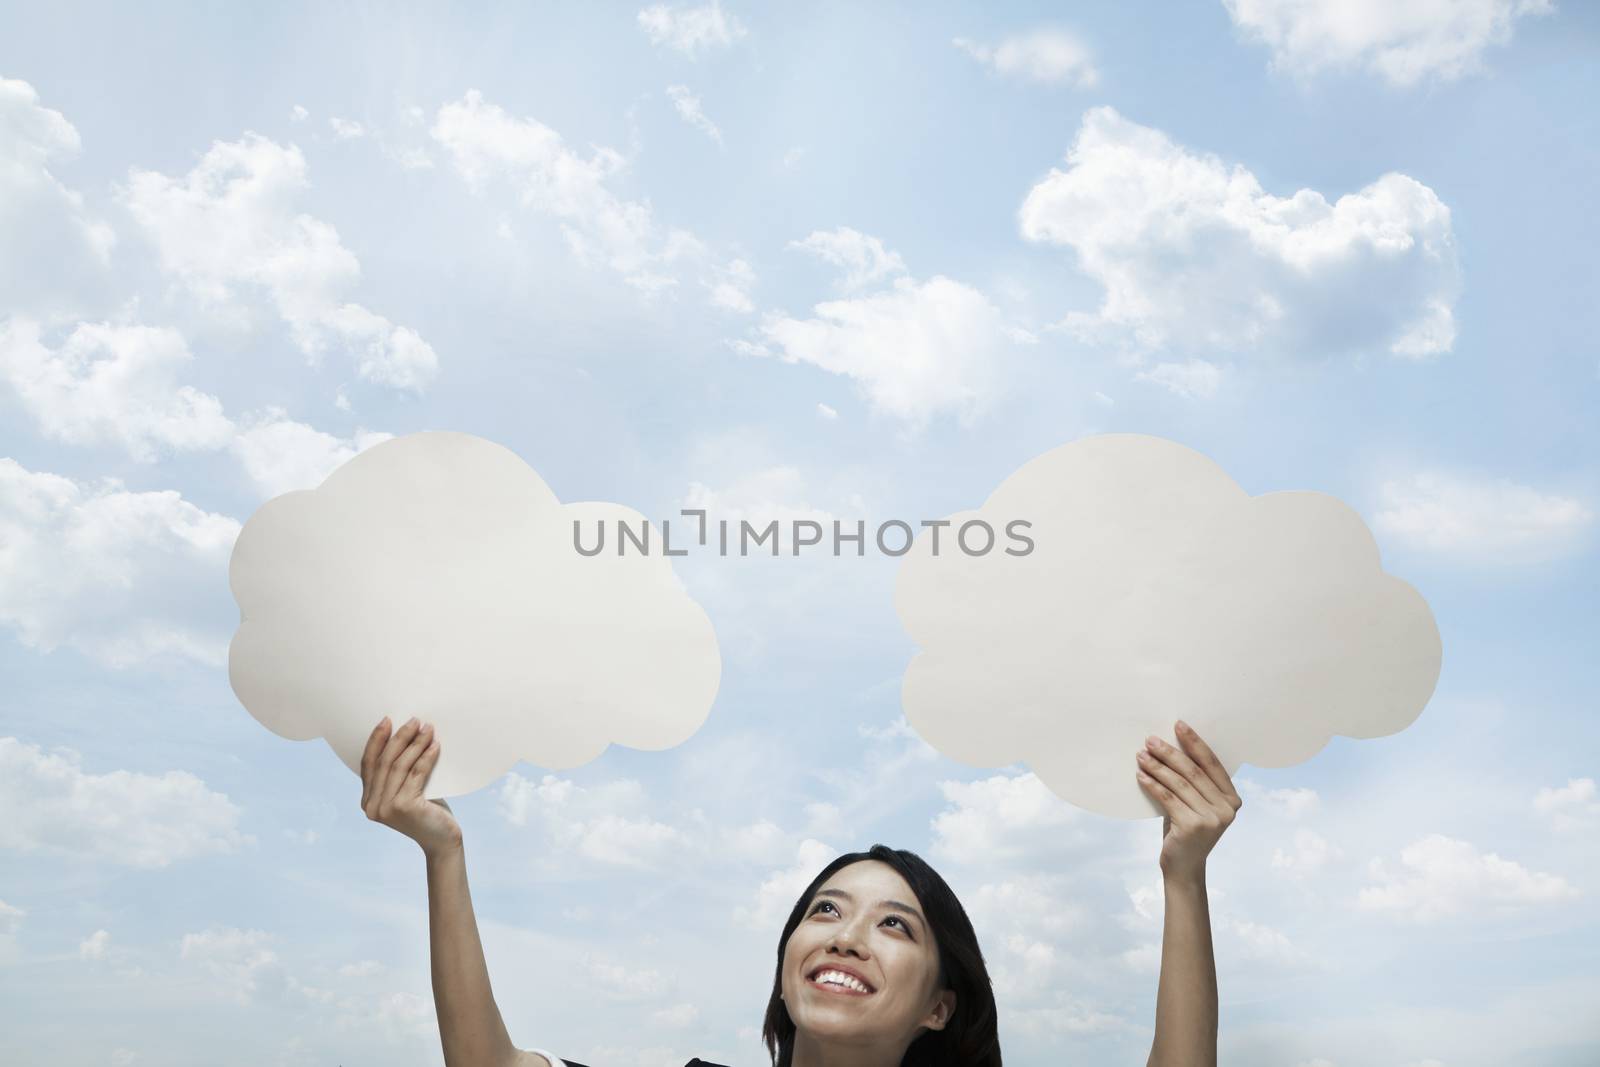 Young woman holding two cut out paper clouds against a blue sky with clouds